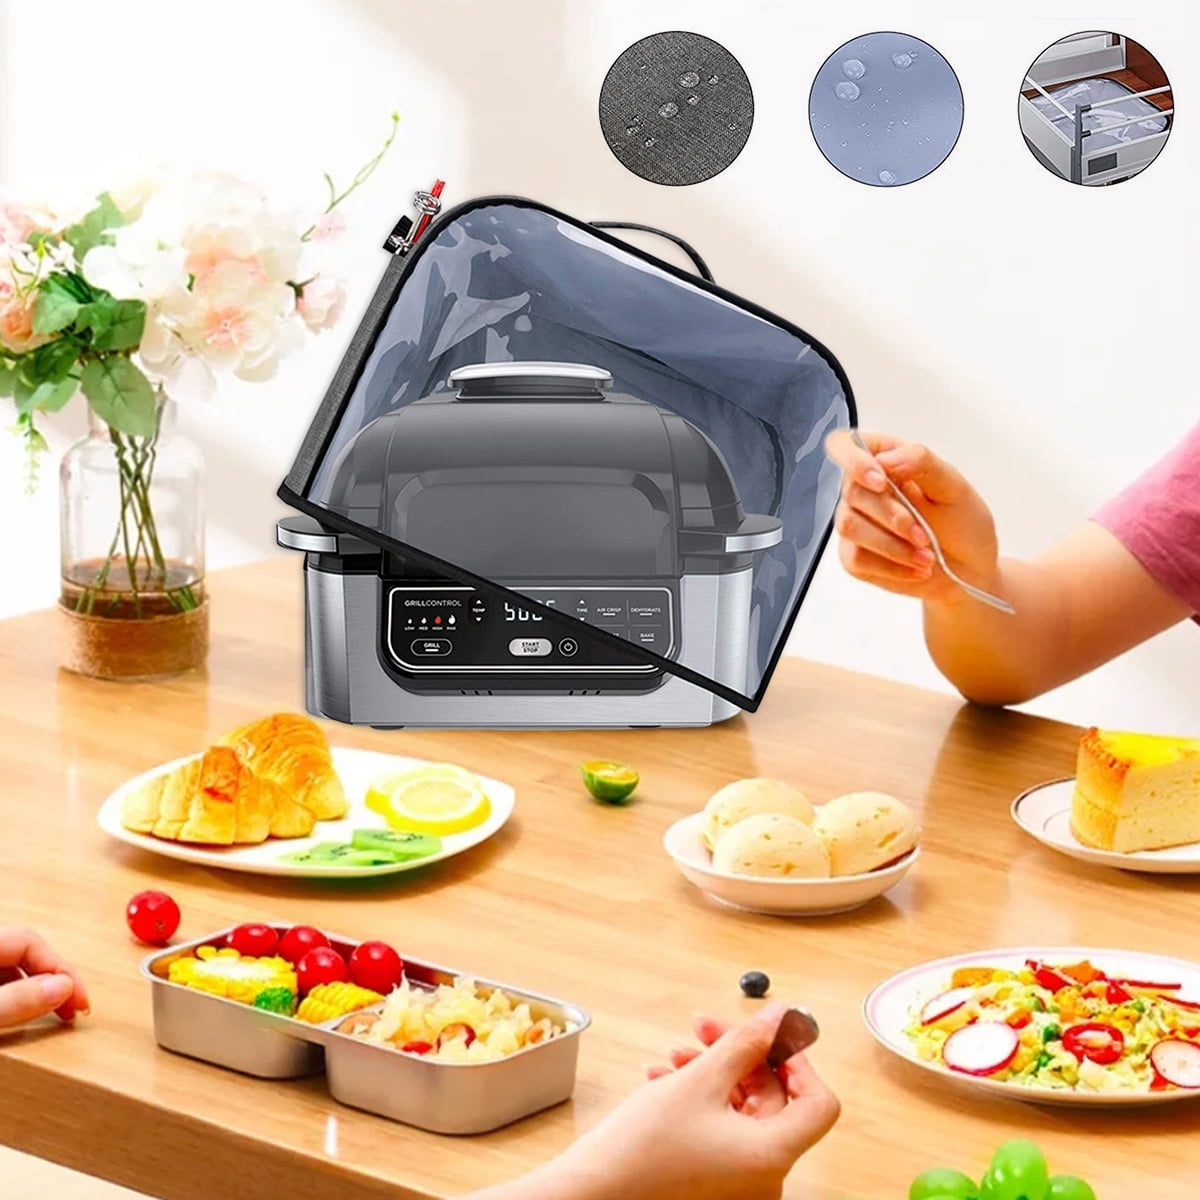 Bobash Kitchen Appliance Covers with Pockets Waterproof Air Fryer Dust Cover Durable Dust Protection Square Accessories with Handle Gray, Size: 13.5